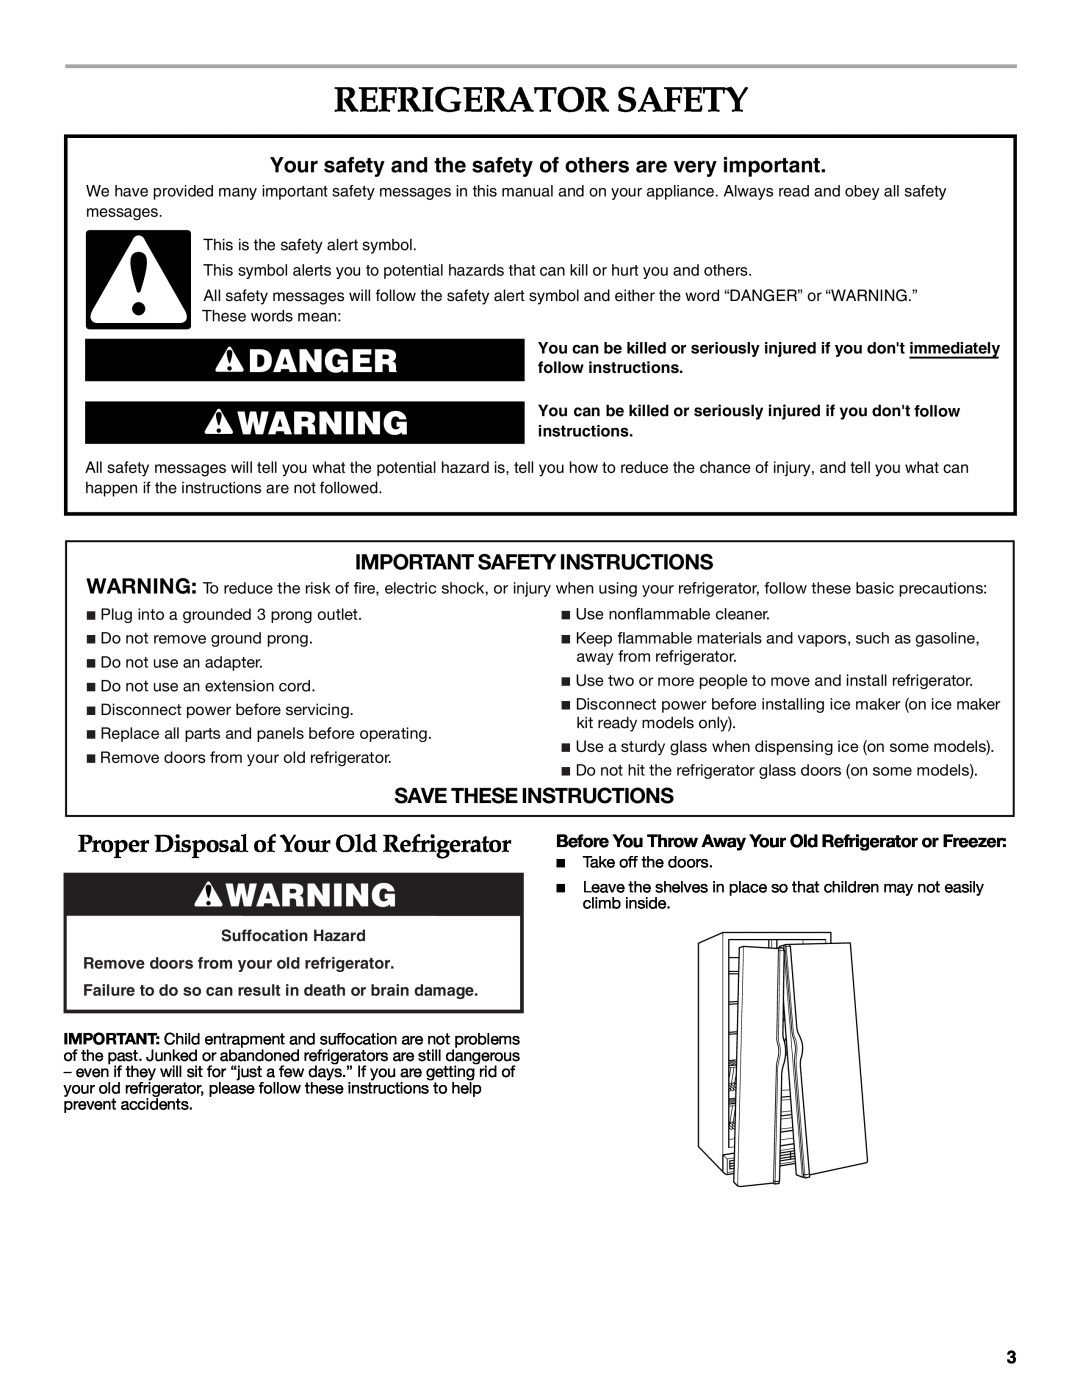 KitchenAid W10303989A Refrigerator Safety, Danger, Proper Disposal of Your Old Refrigerator, Important Safety Instructions 